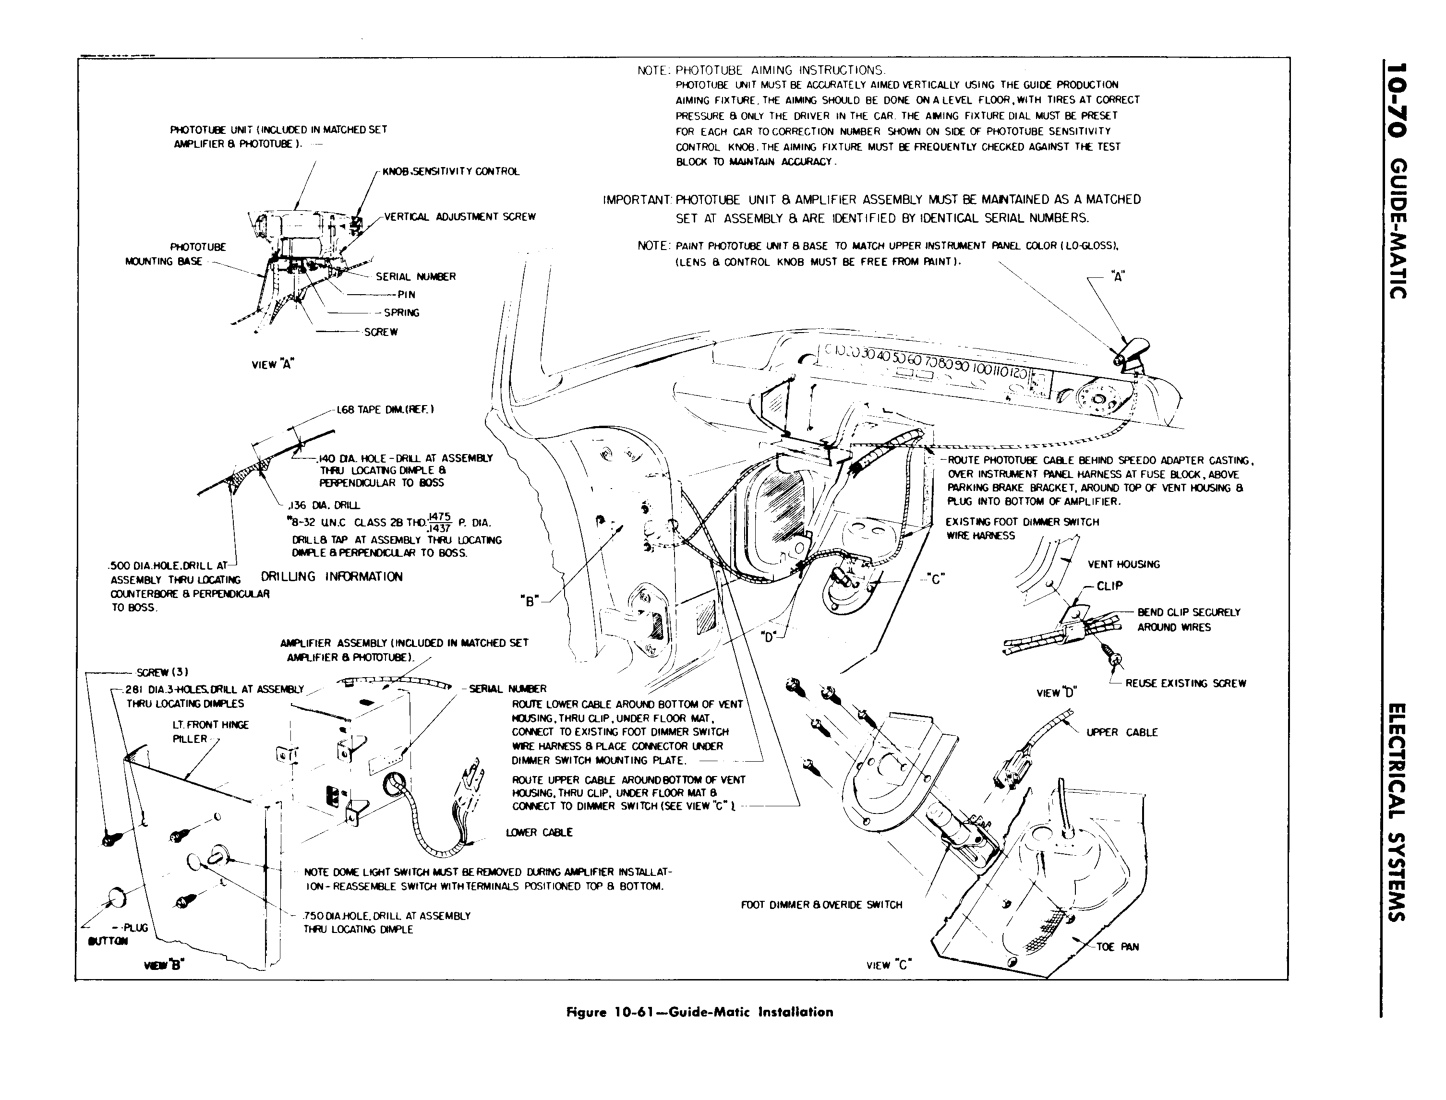 n_11 1960 Buick Shop Manual - Electrical Systems-070-070.jpg